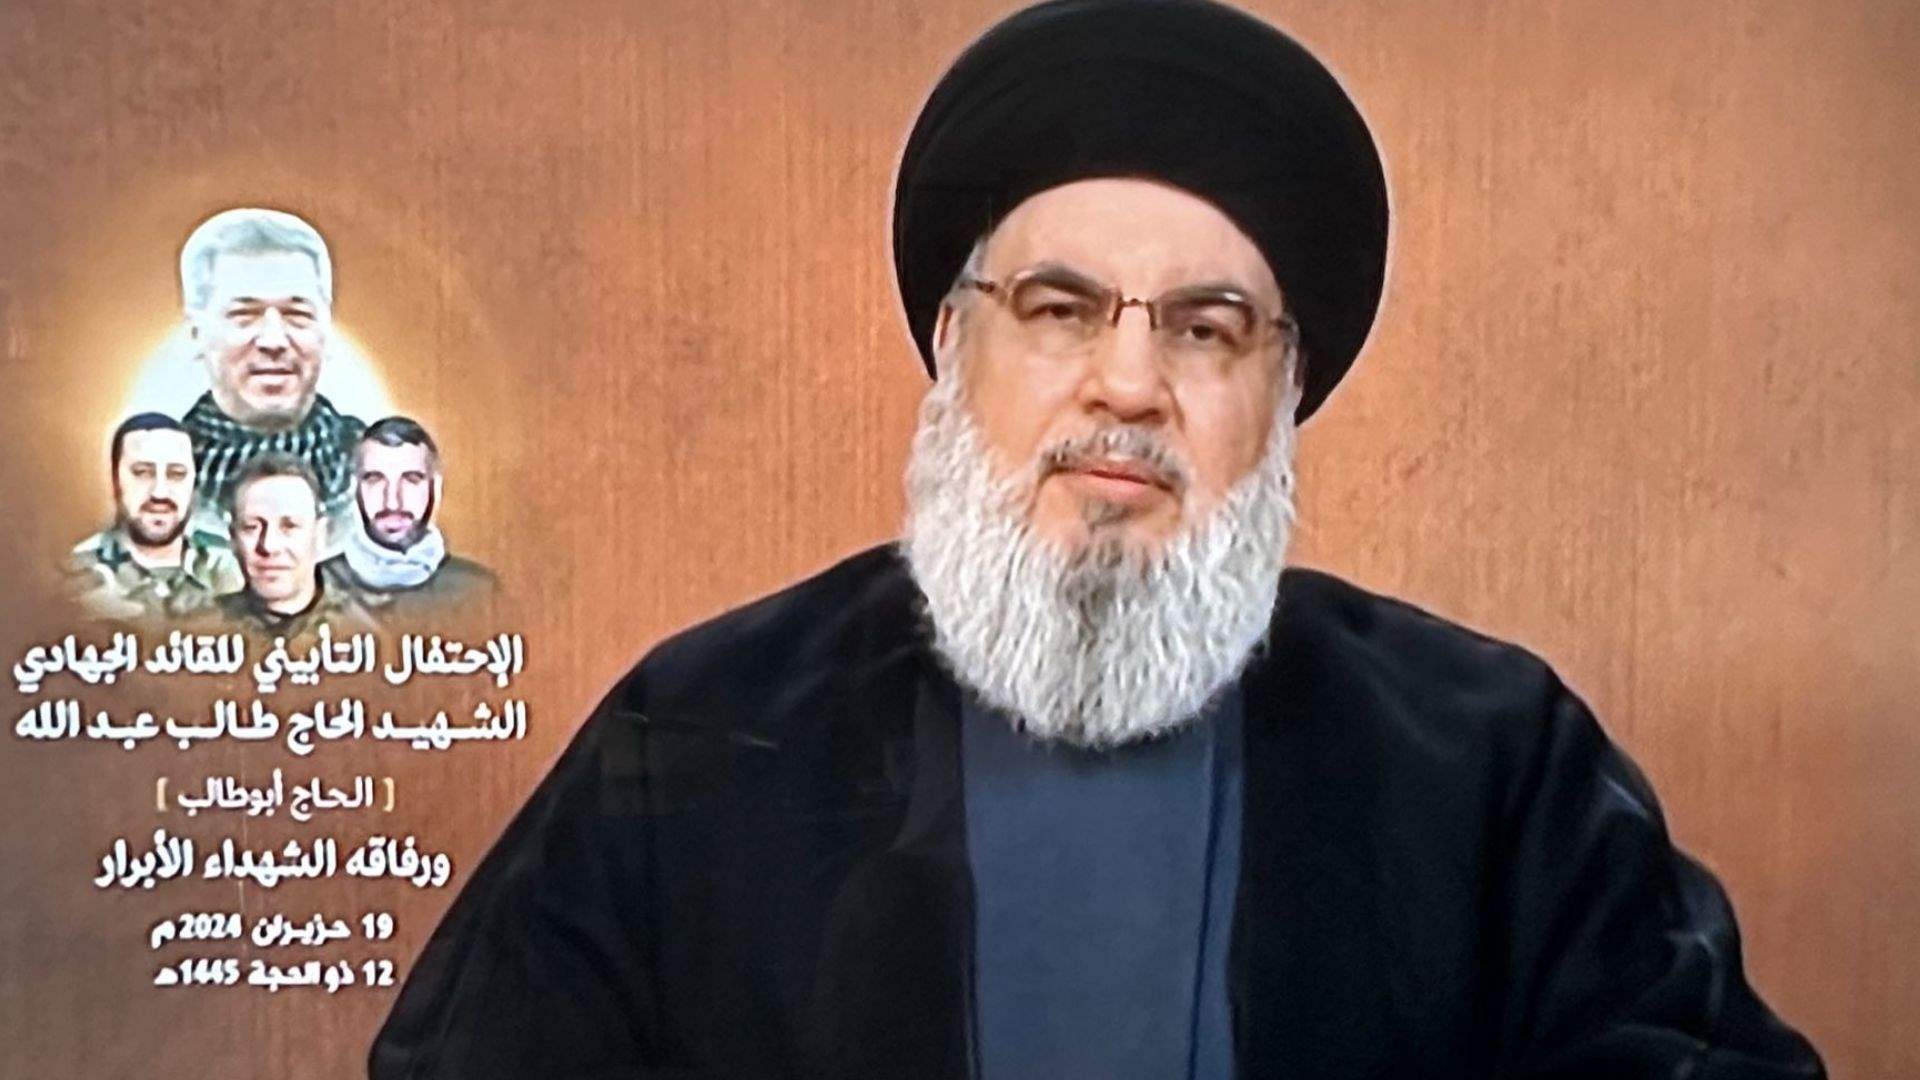 Hezbollah&#39;s Nasrallah threatens Cyprus over Israeli access, affirms commitment to Gaza &#39;support front&#39; in latest speech 